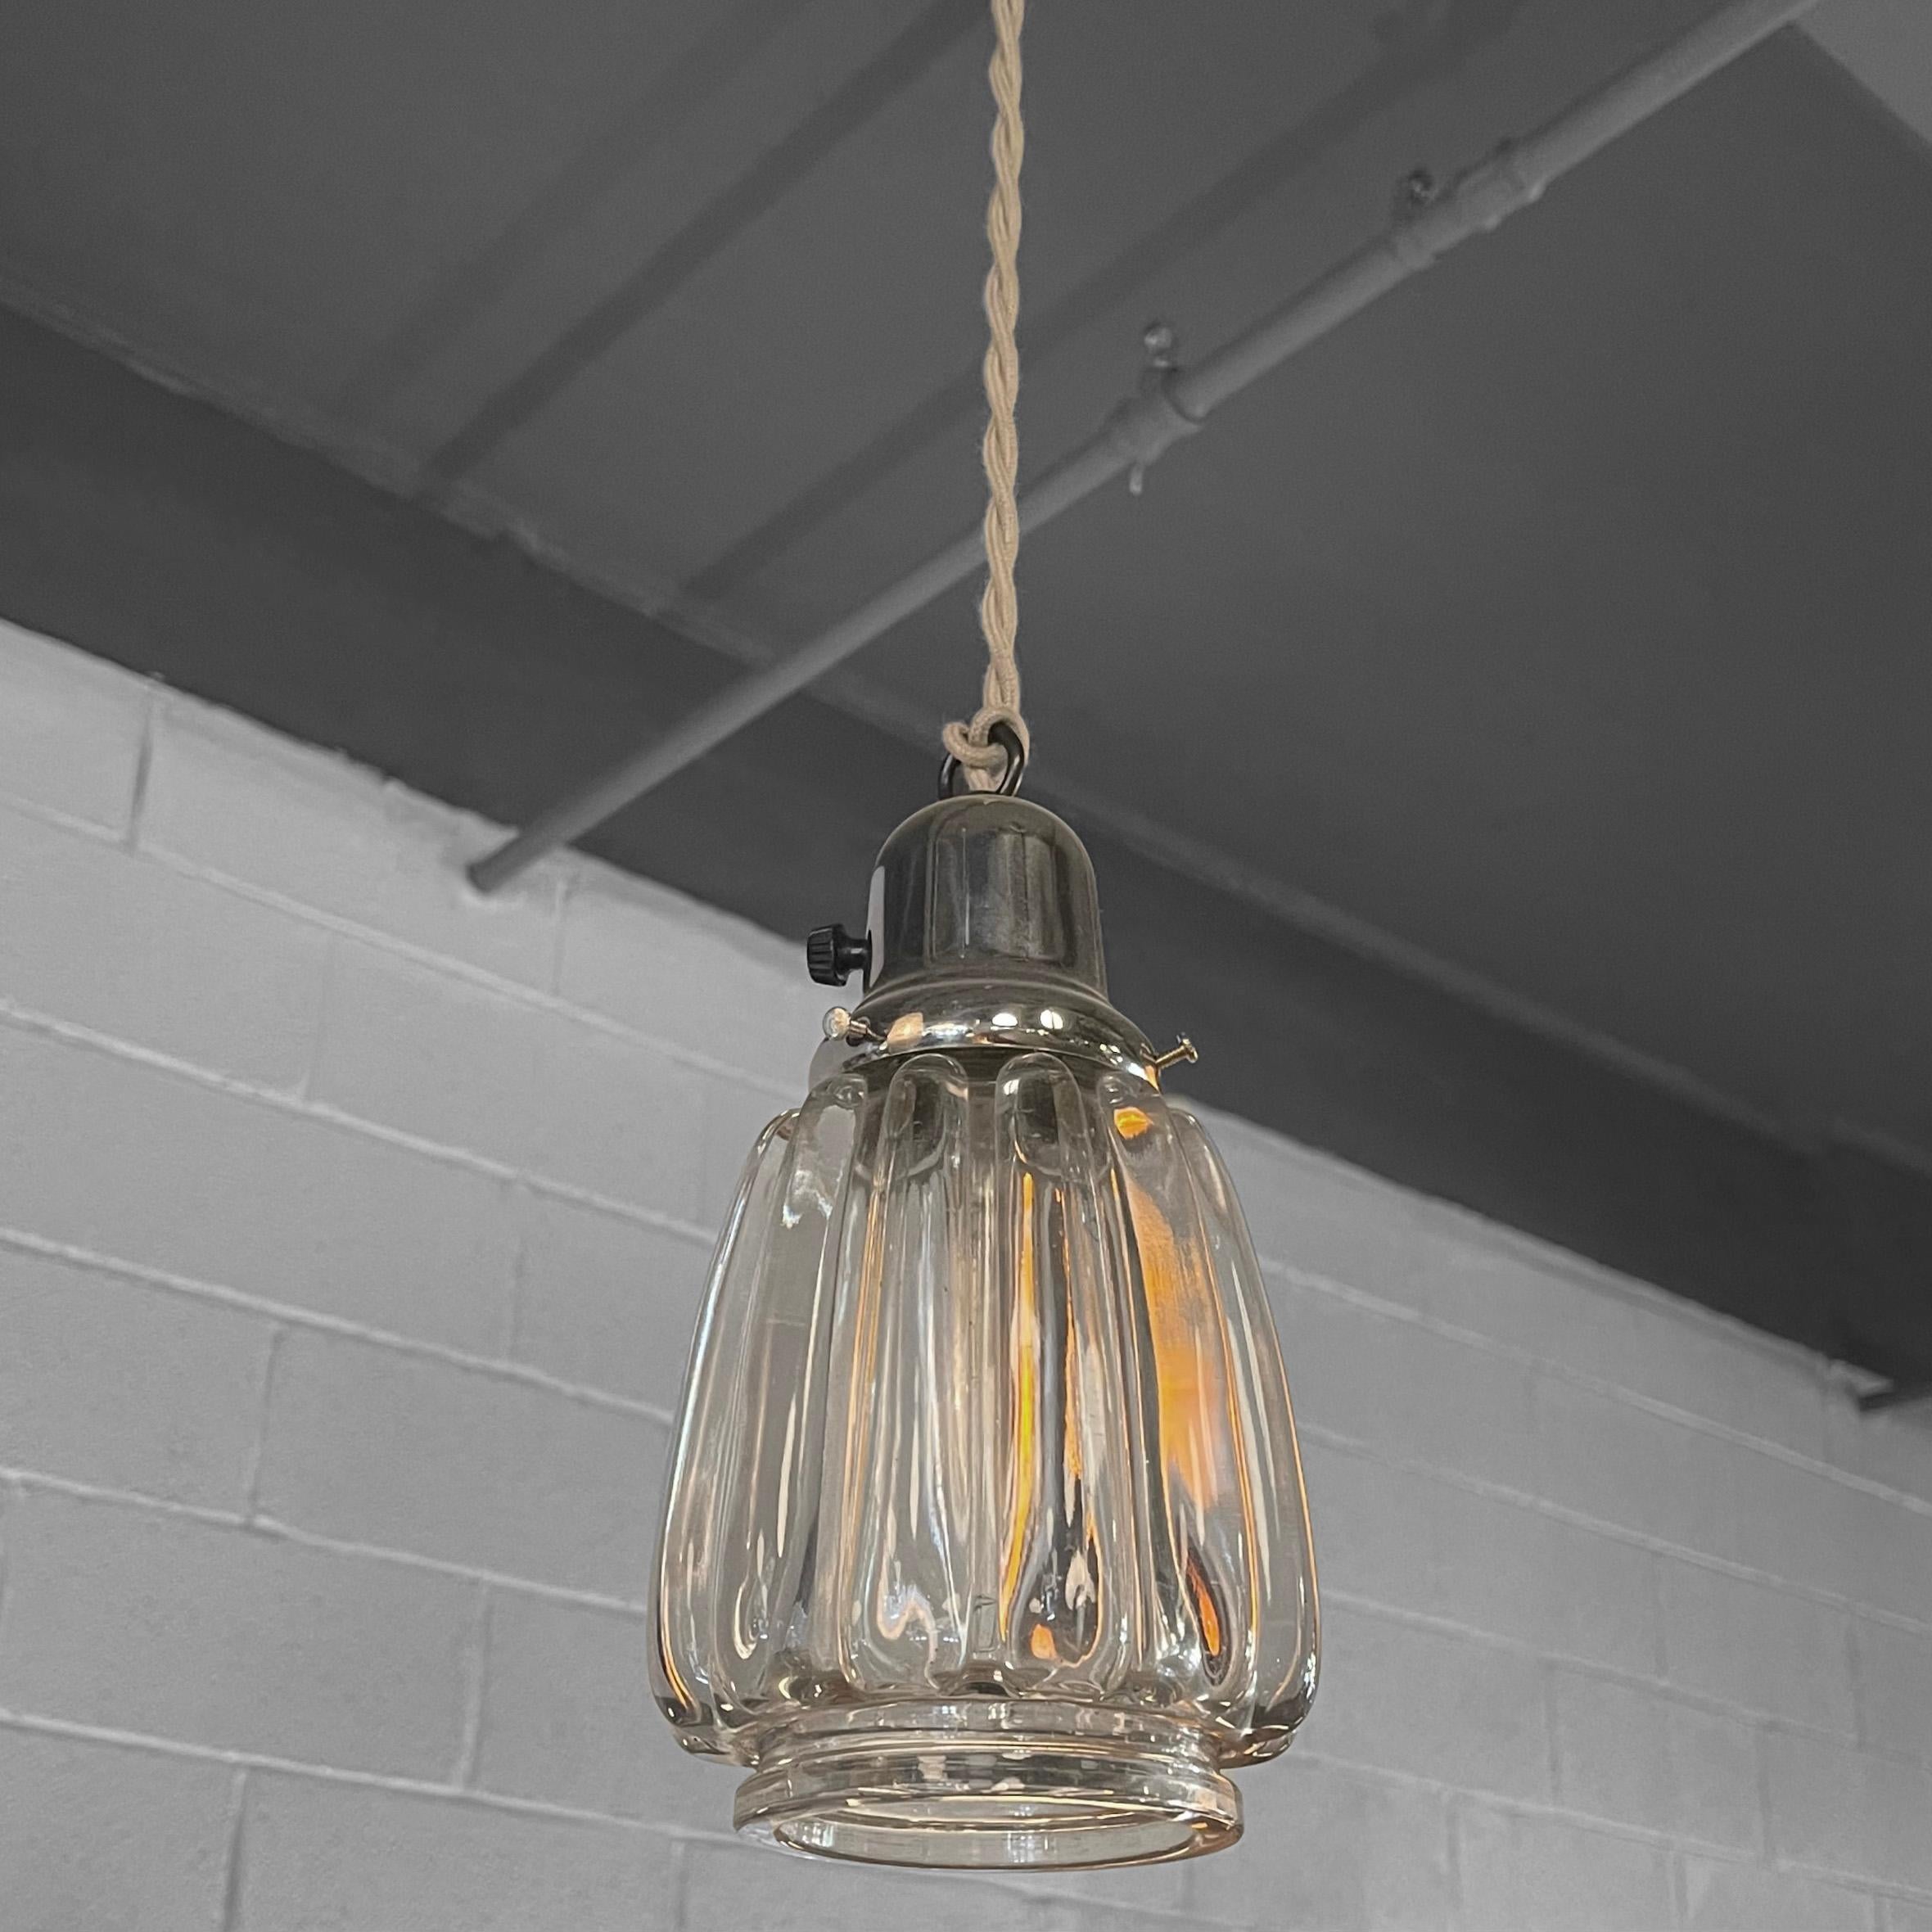 Midcentury, Hollywood Regency, pendant light features an open, molded glass shade with chrome, paddle switch fitter. The pendant is newly wired with 40 inches of braided beige cloth cord to accept up to a 75 watt, medium socket bulb.